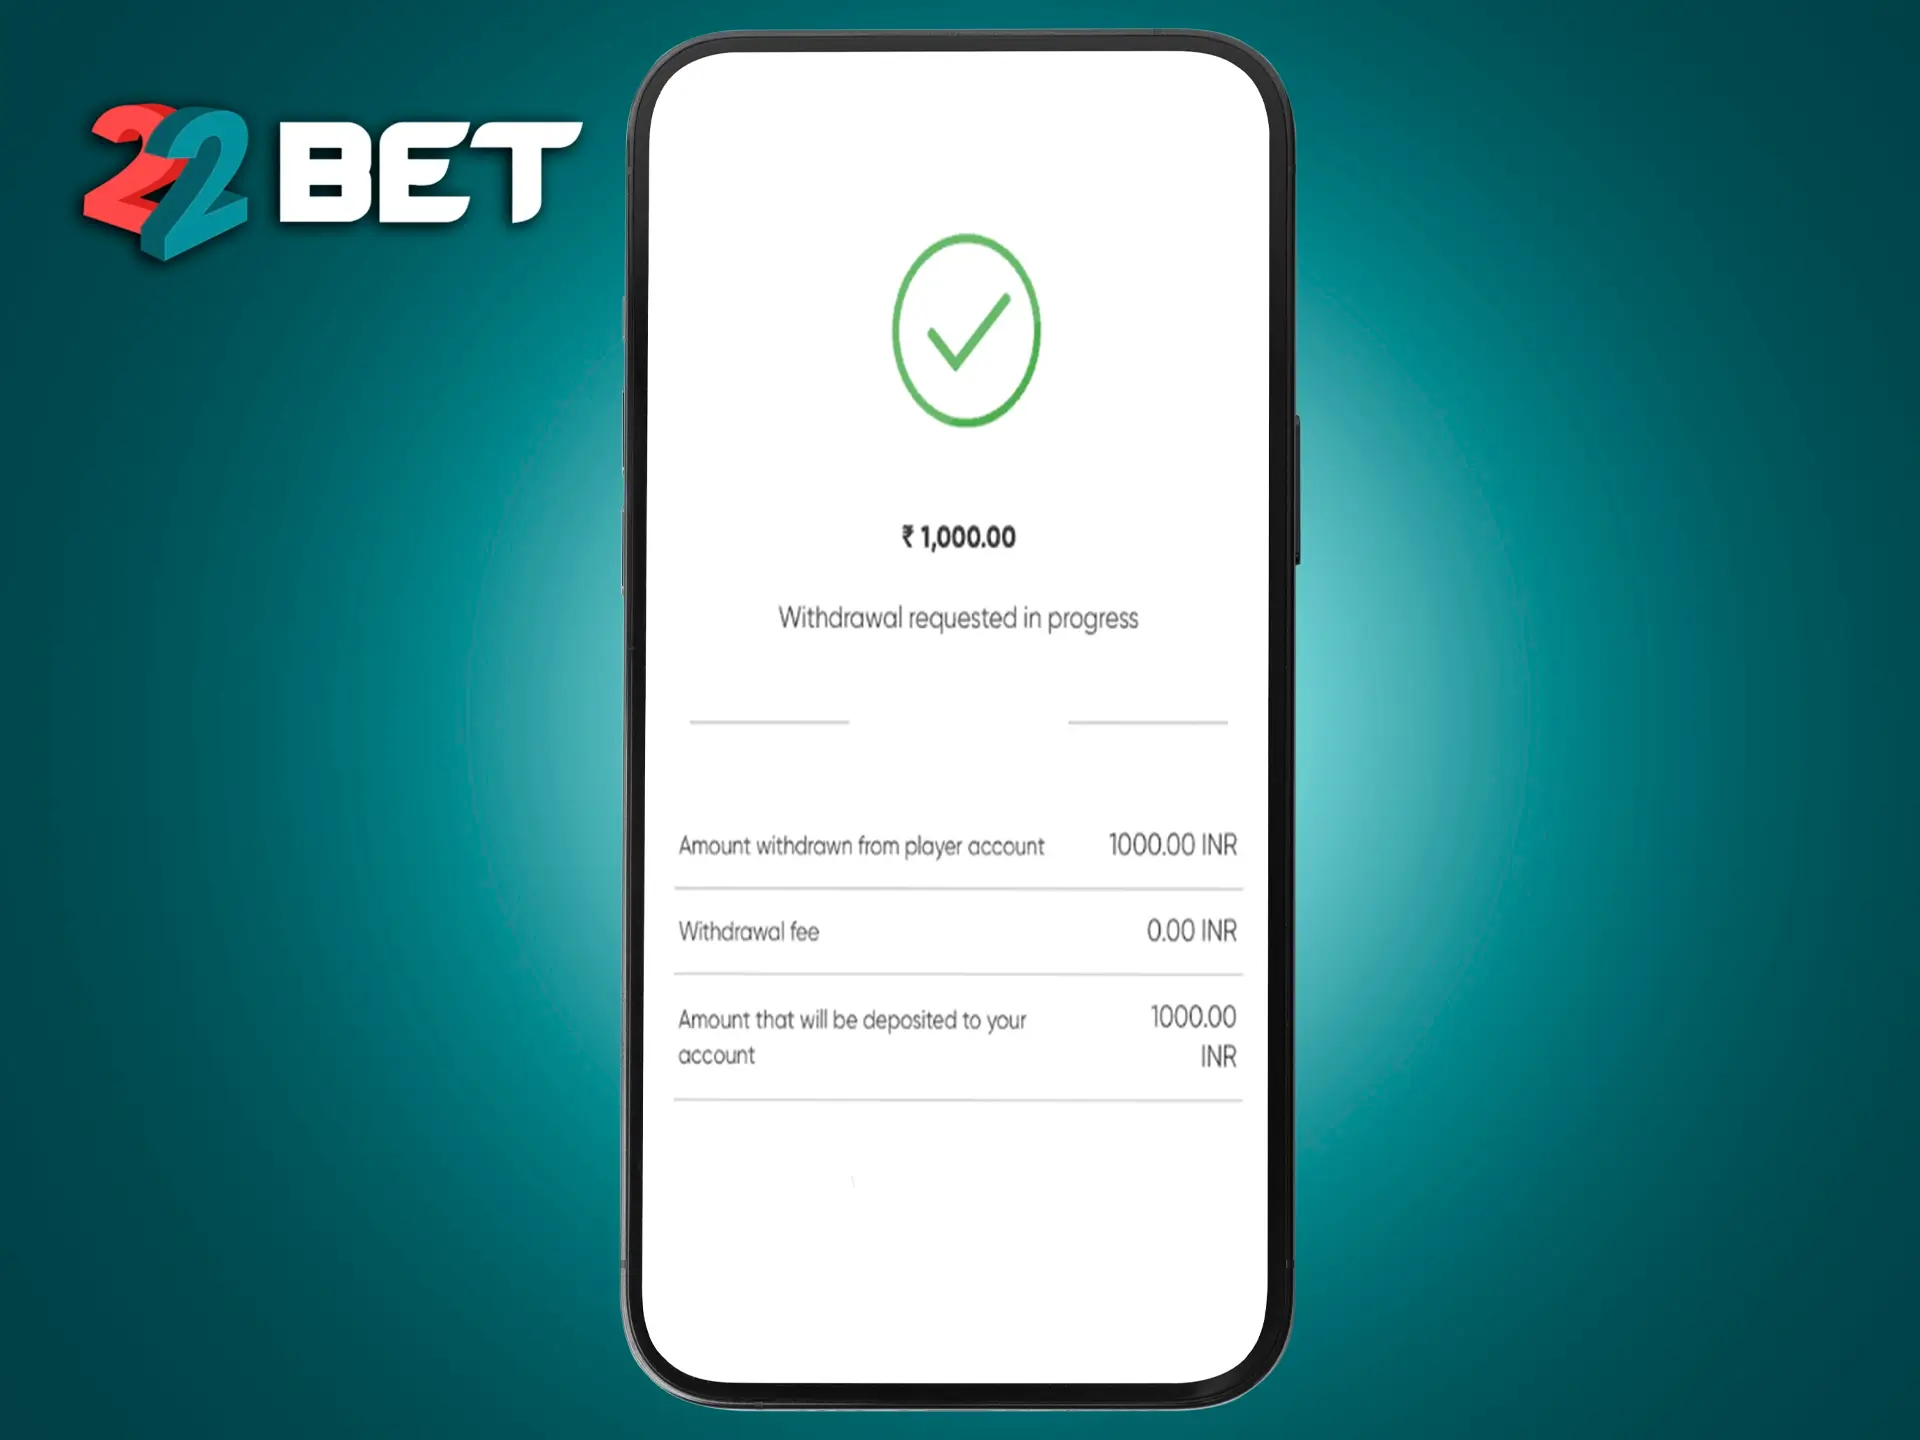 Wait for the withdrawal confirmation from 22Bet and check your account for the money.